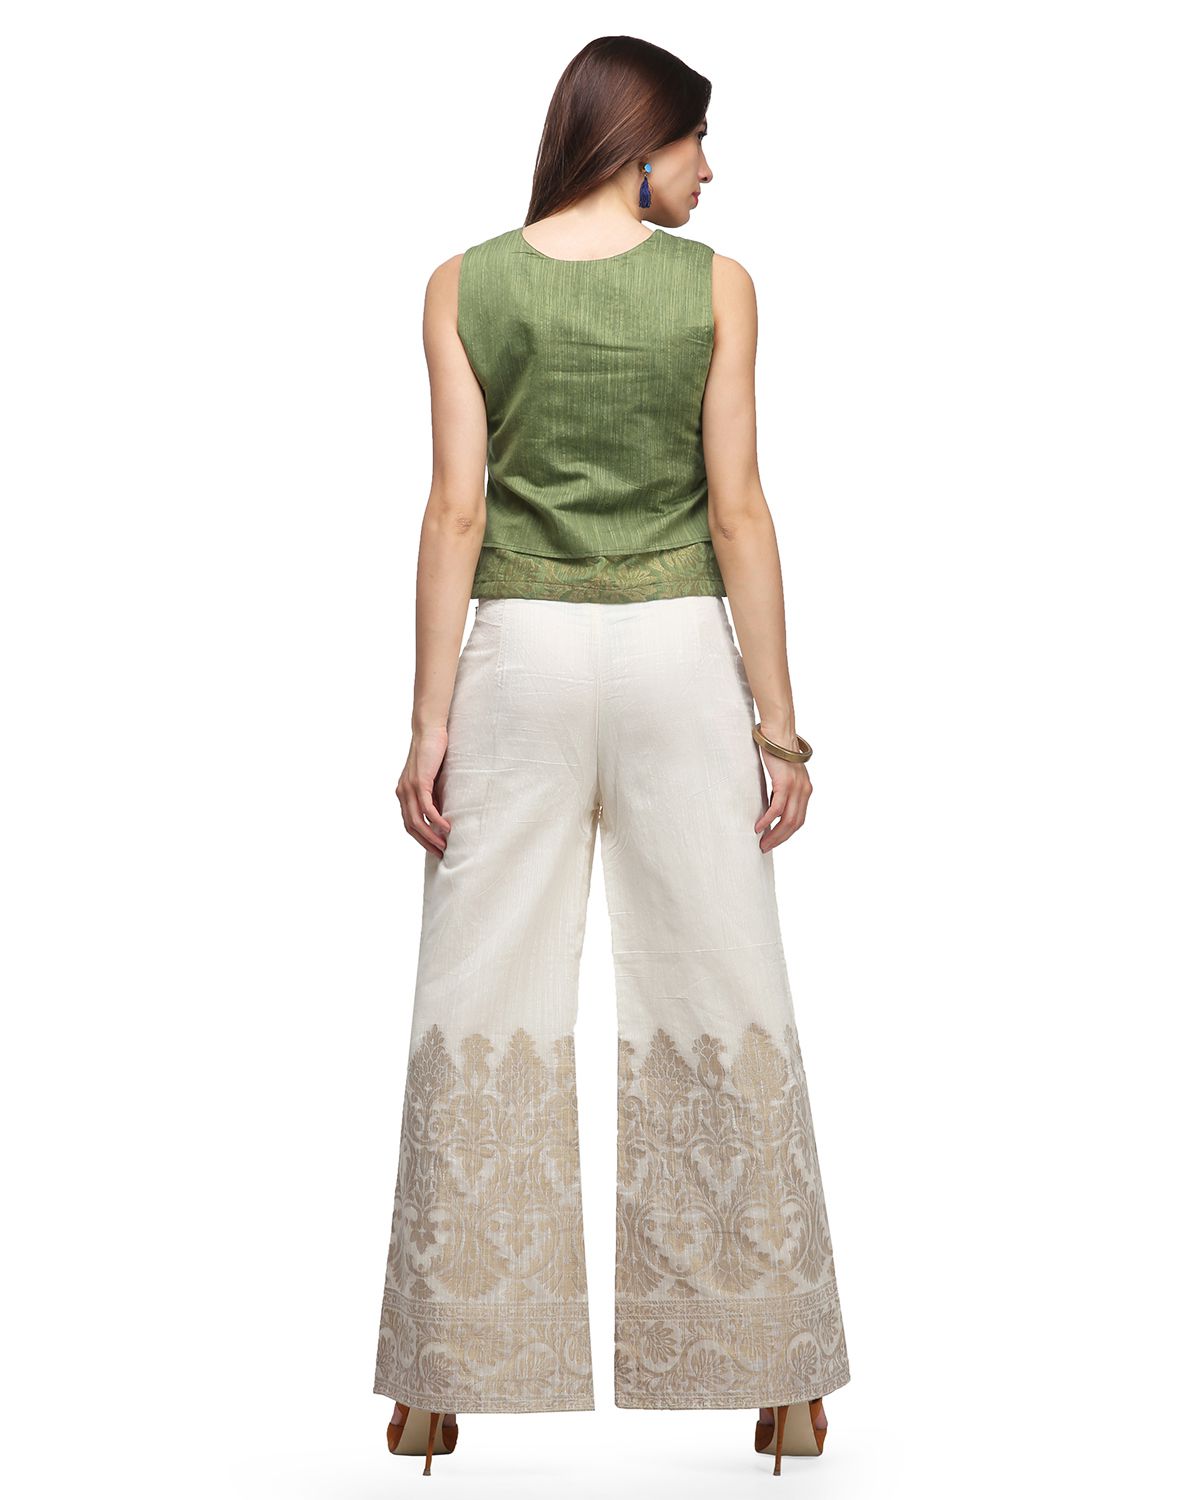 Buy Abhishti White Poly Cotton Palazzos Online at Best Prices in India ...